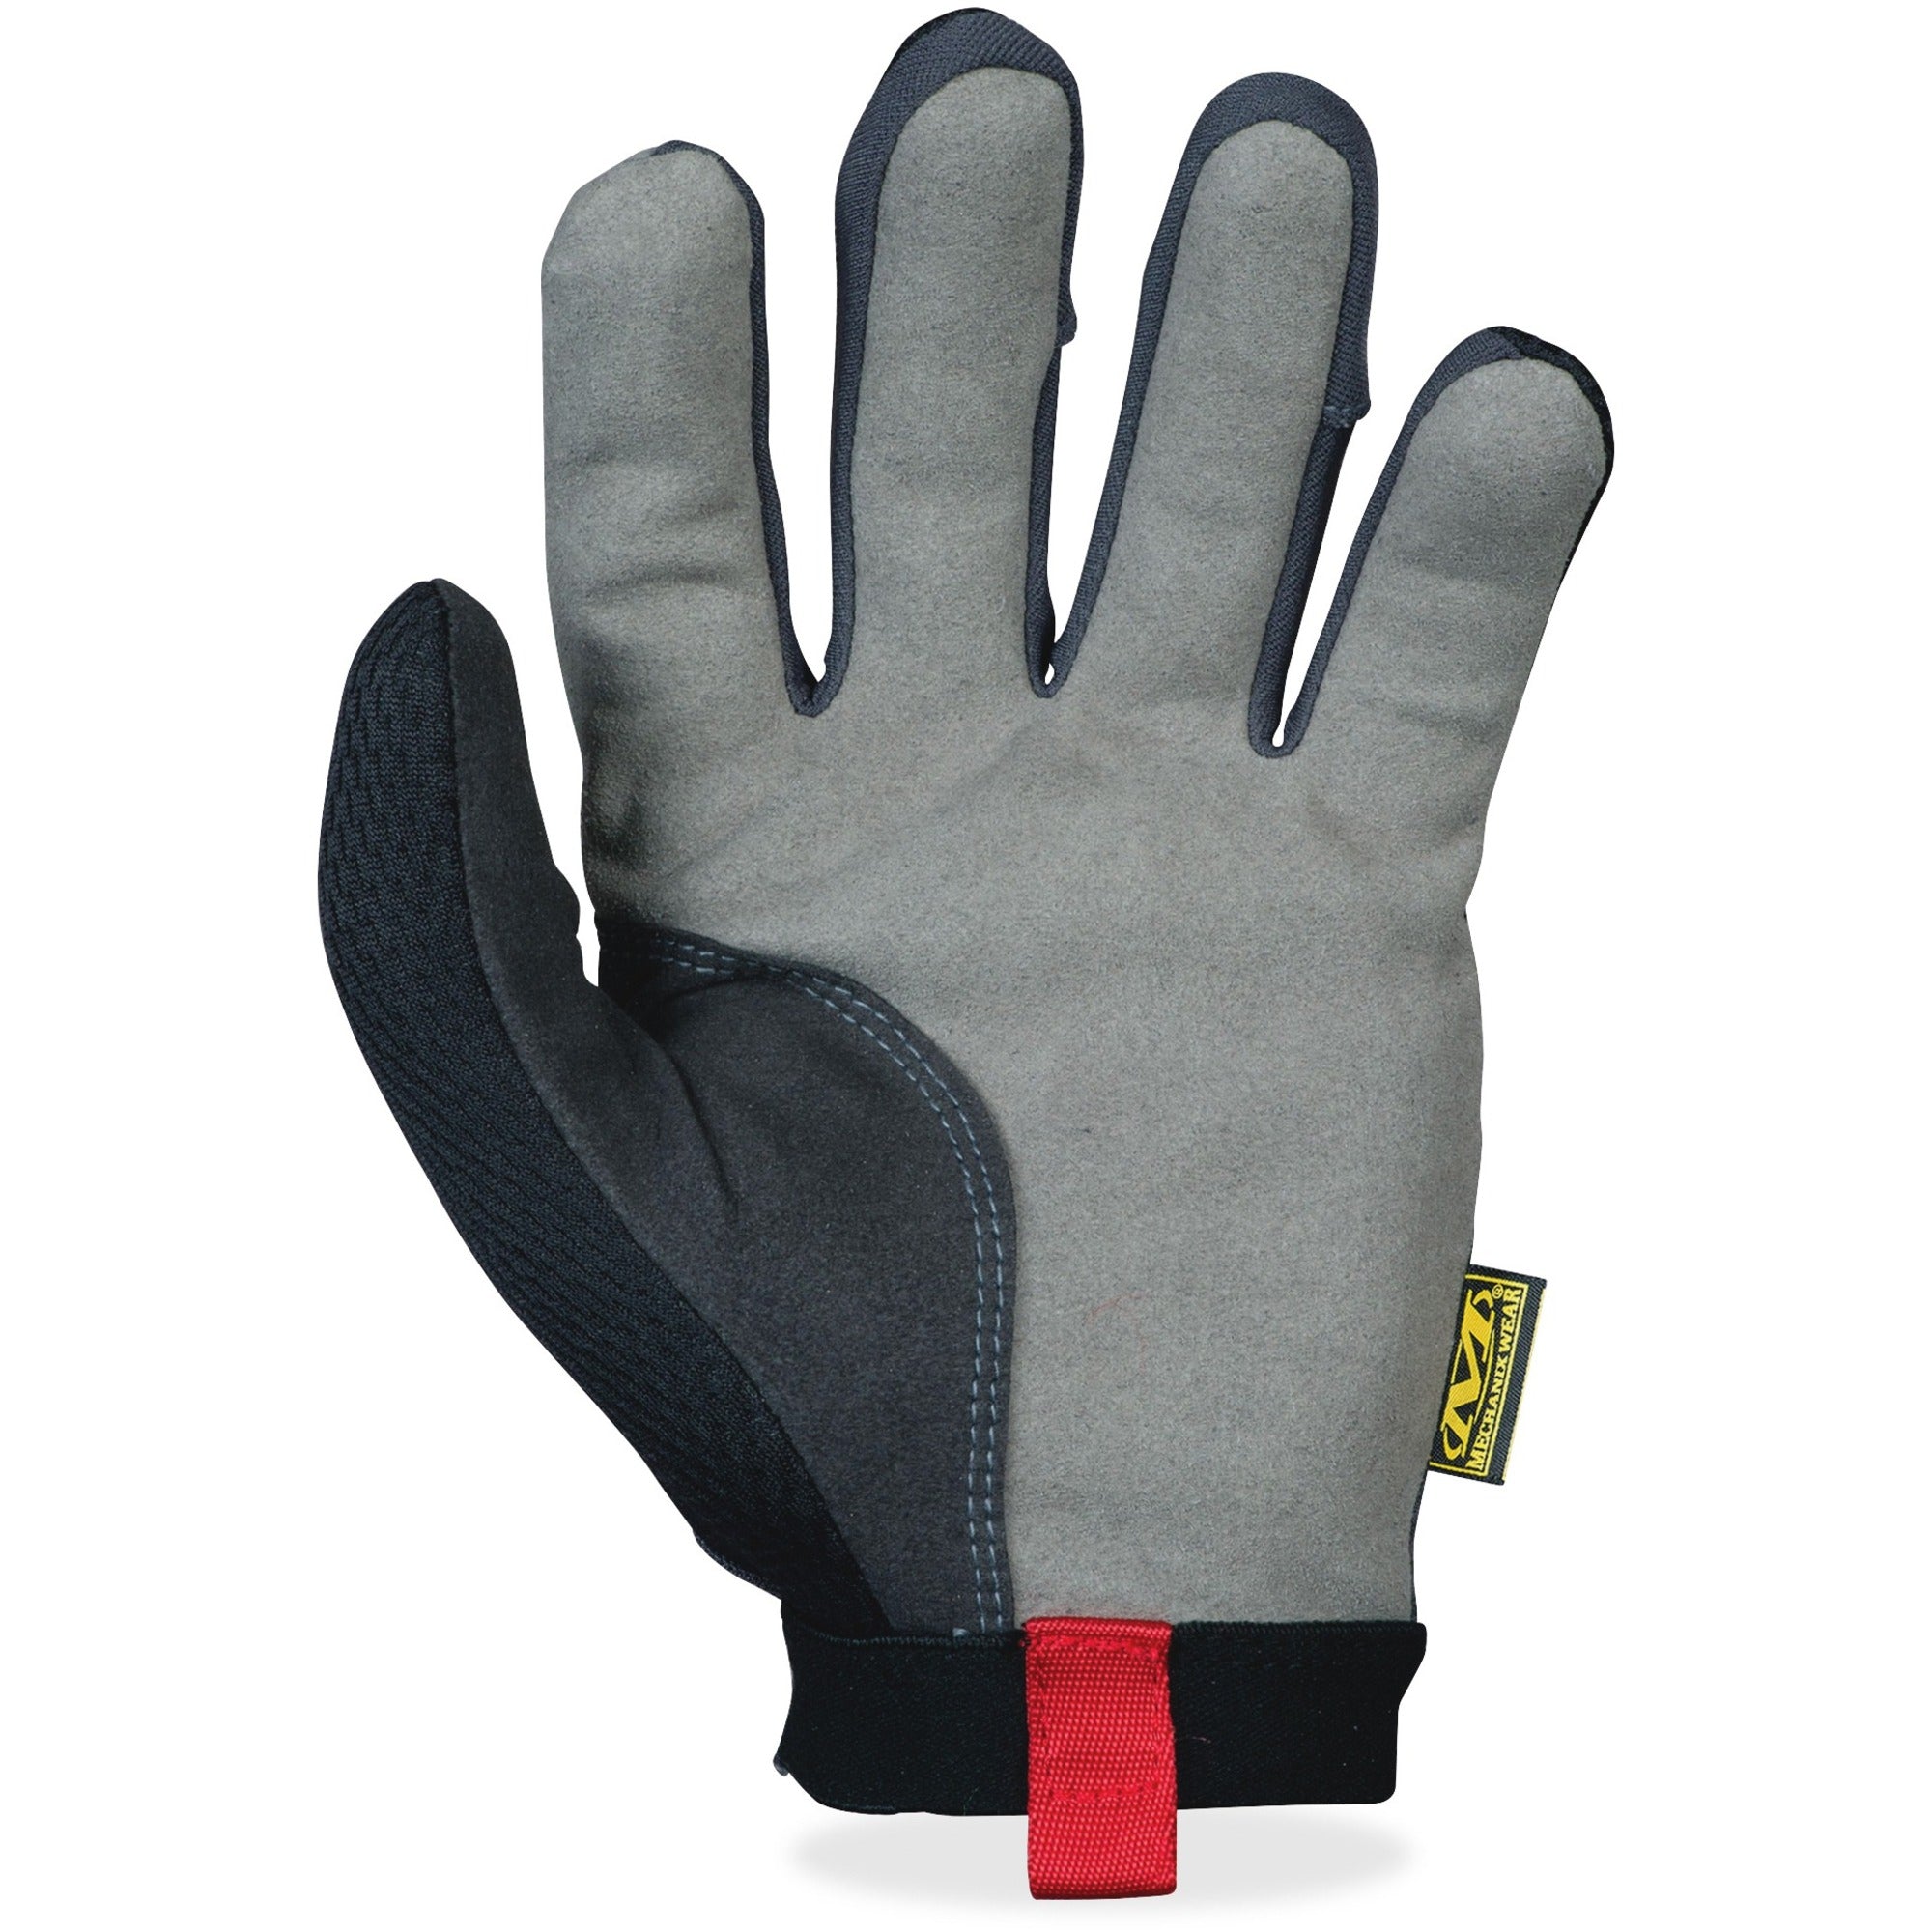 mechanix-wear-2-way-stretch-utility-gloves-10-size-number-large-size-black-air-vent-stretchable-reinforced-palm-pad-snag-resistant-hook-&-loop-1-pair_mnxh1505010 - 1